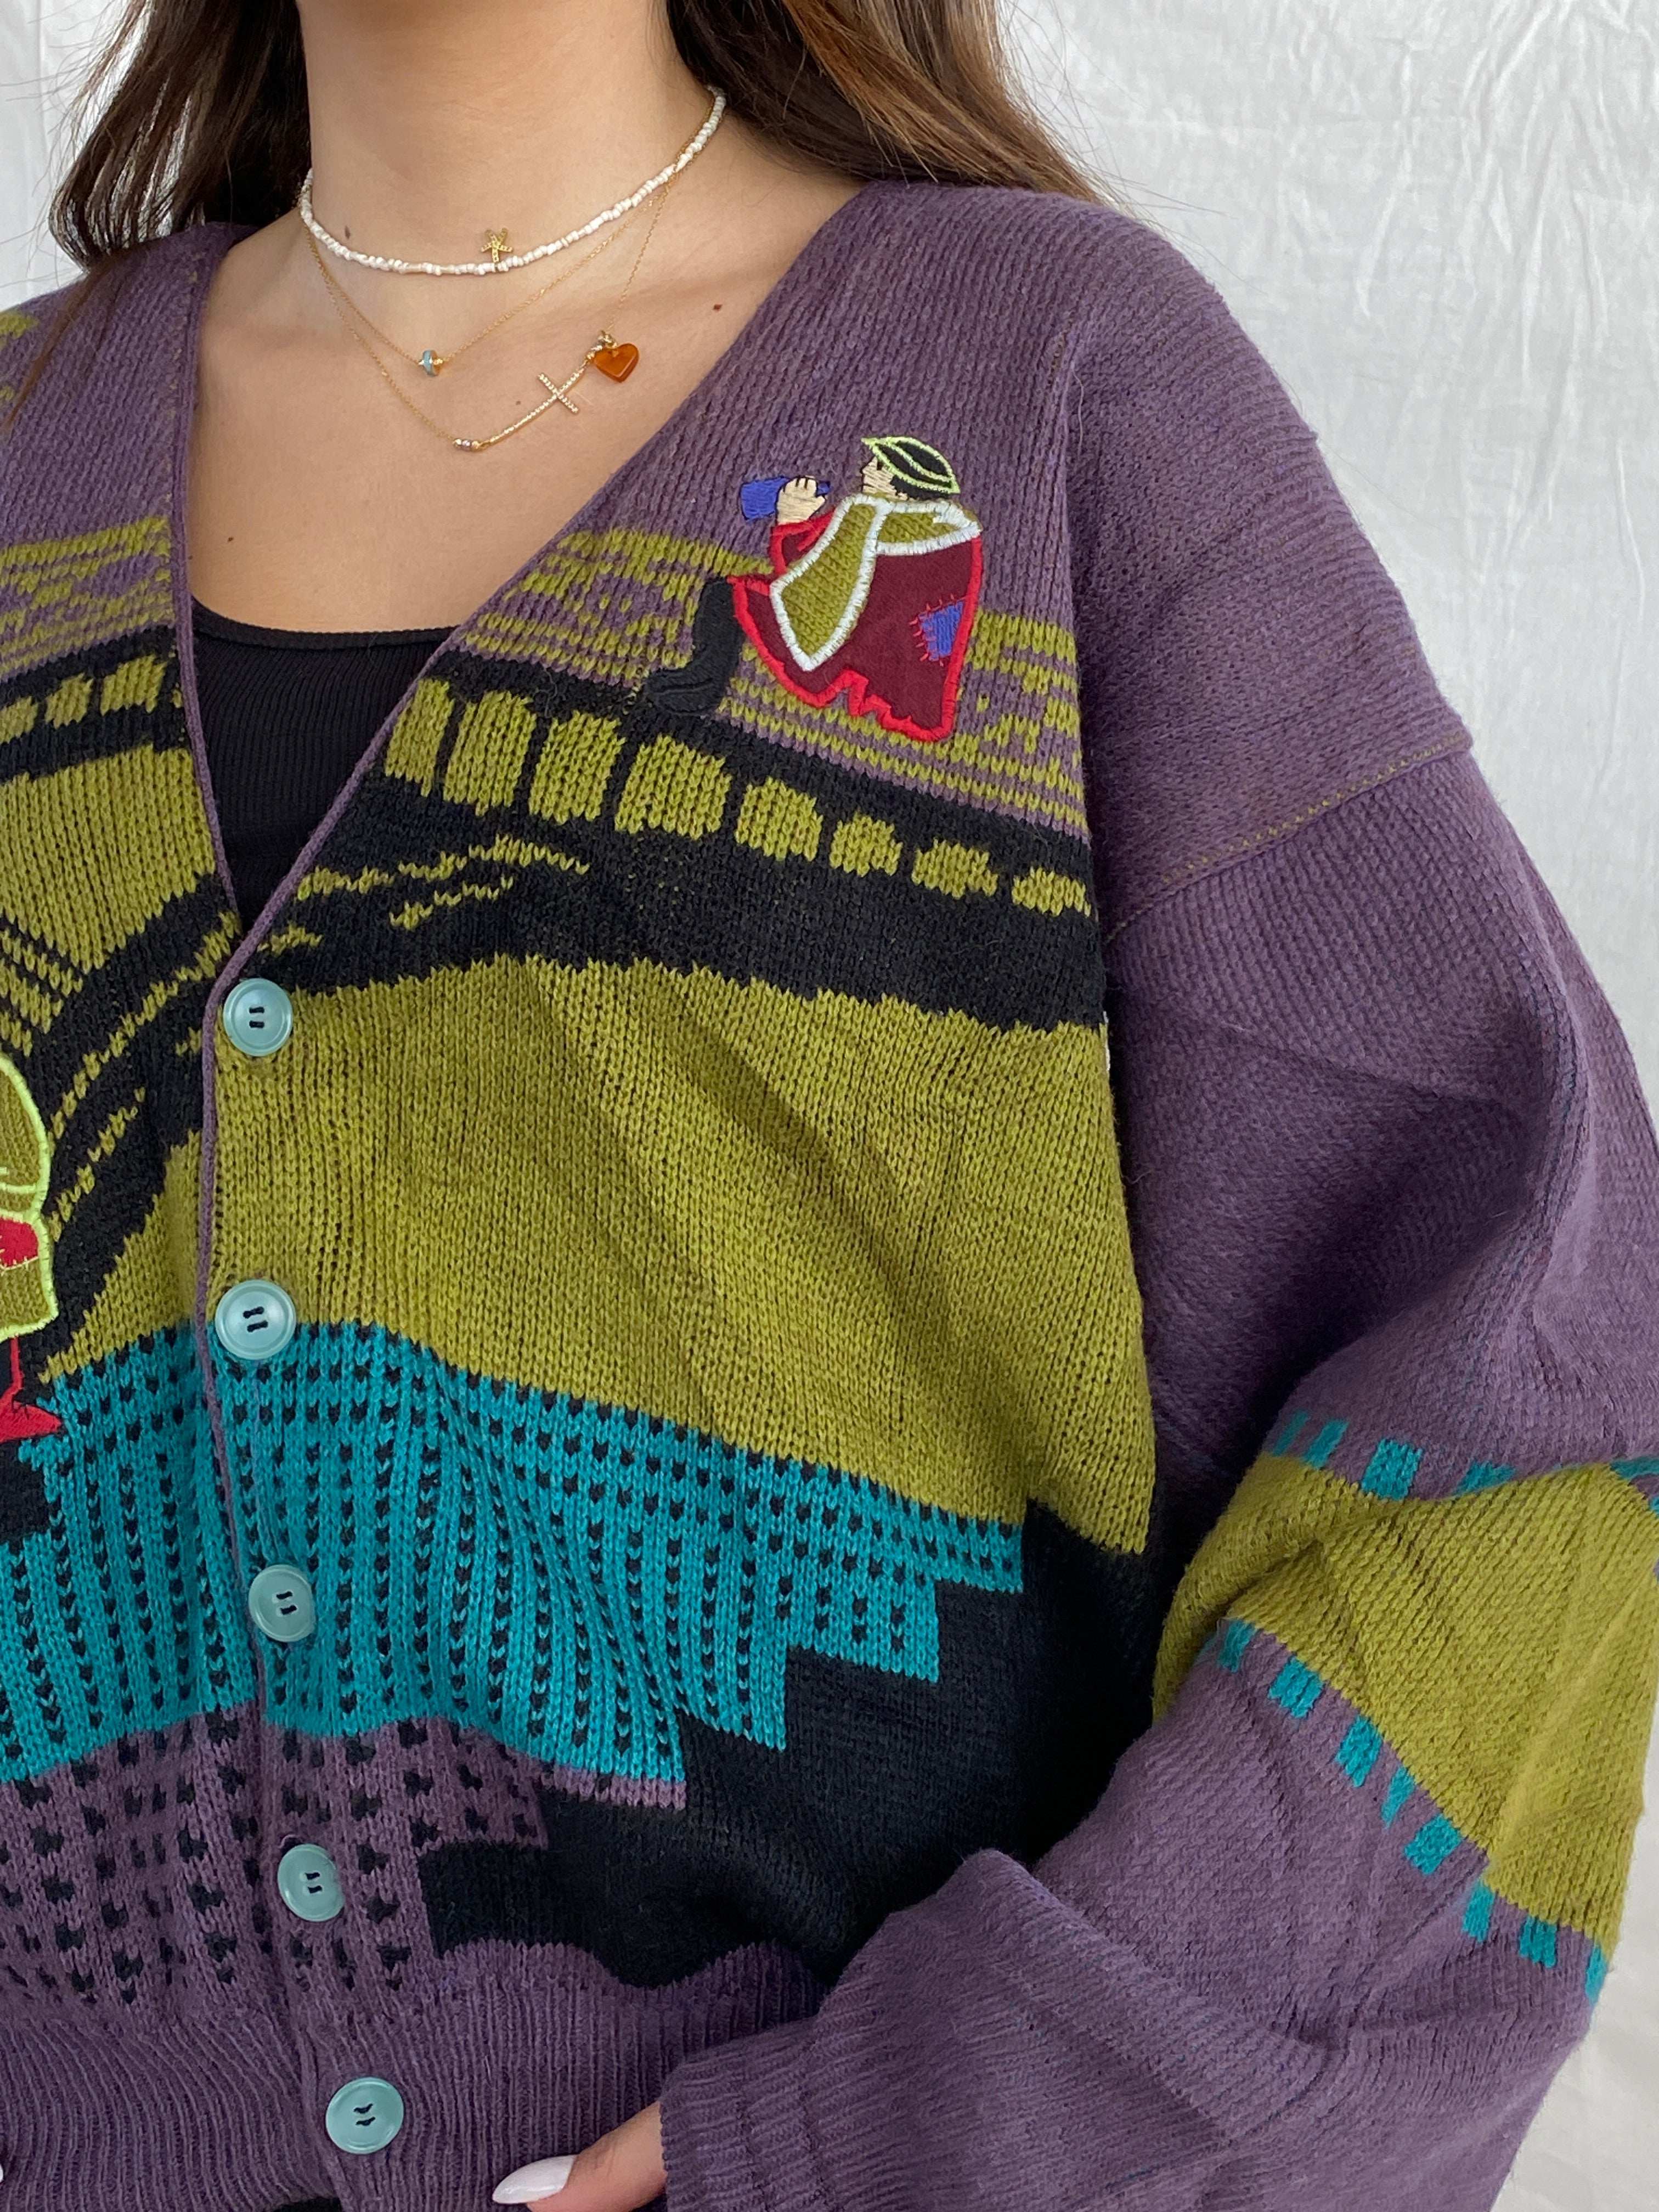 Cutest Vintage Button Up Knitted Cardigan - Balagan Vintage Cardigan 90s, Juana, knit, knitted, knitted cardigan, knitted sweater, NEW IN